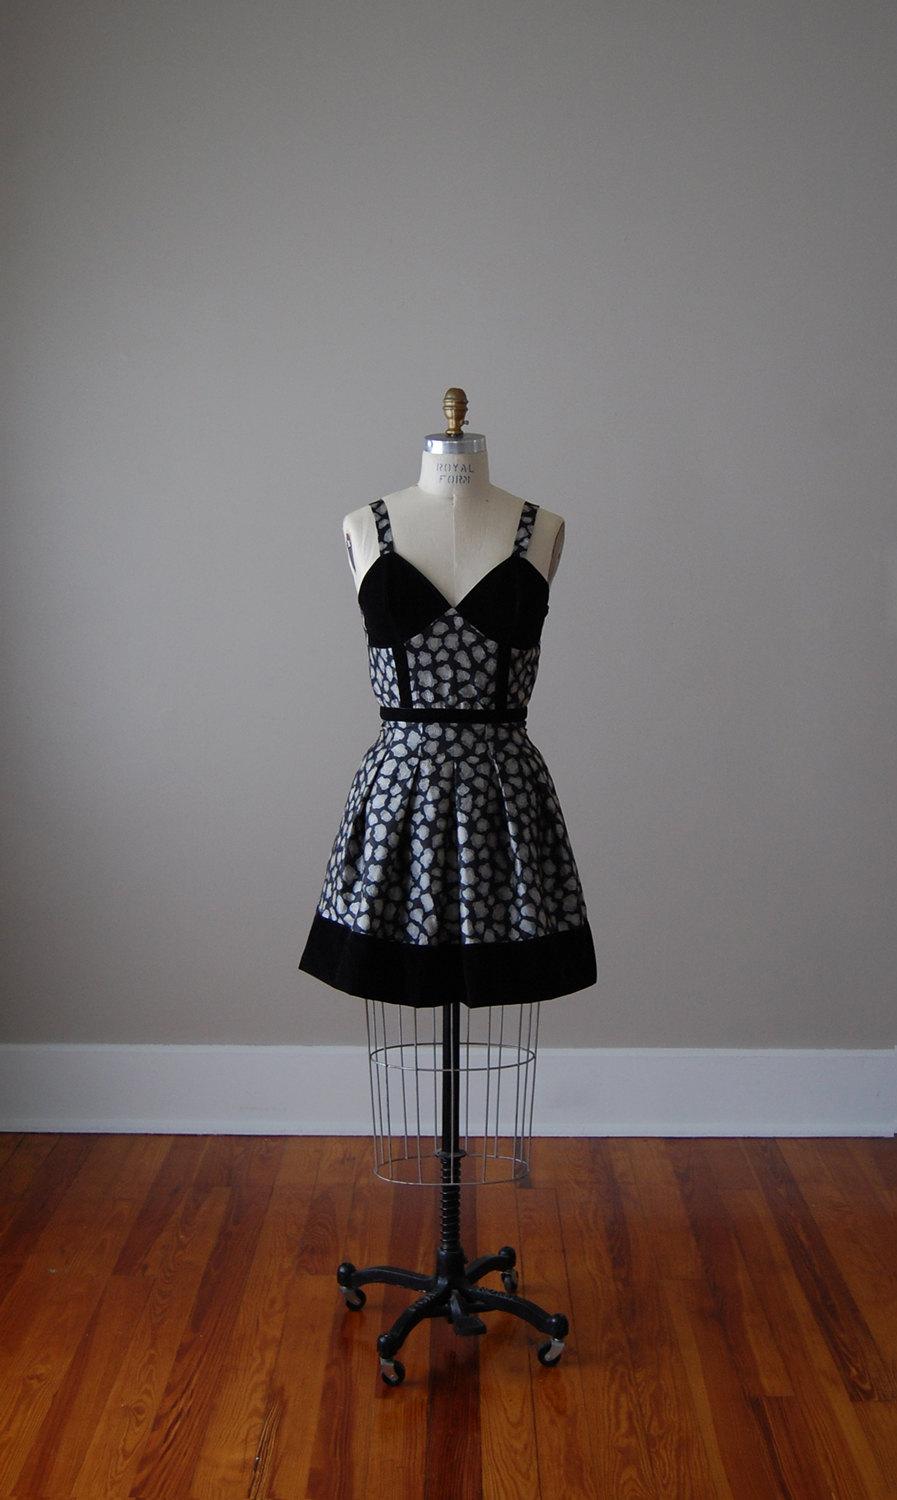 Wedding - Vintage Inspired Velvet and Leopard Dress / Pleated / Black and Silver / Pinup Dress / Cocktail / Party / Evening / Handmade